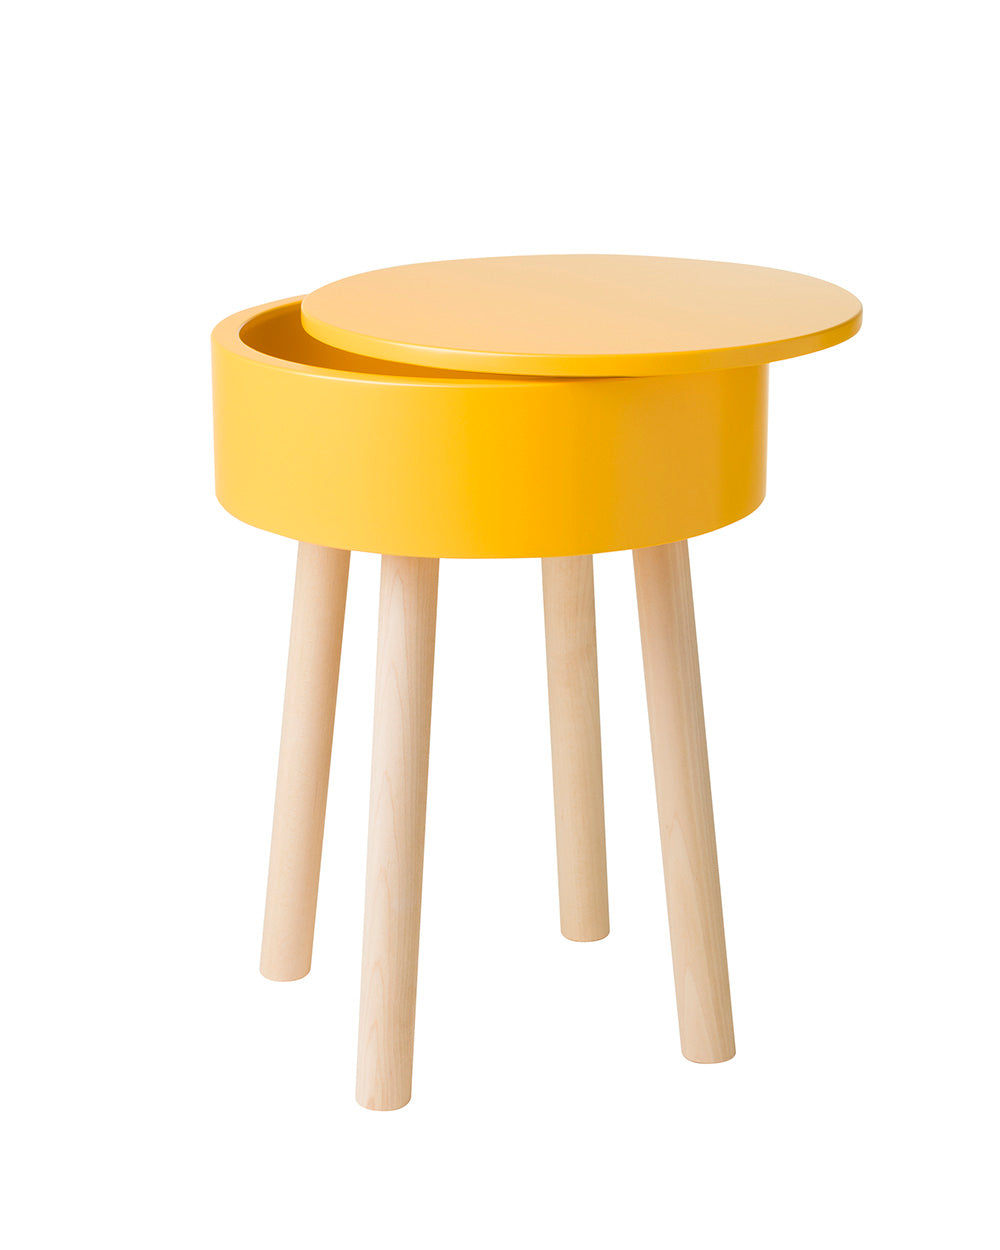 Multifunctional Piilo stool in Bold Yellow. Piilo is a stool with storage space hidden inside its seat. Designed by Hanna Lantto. Made in Finland.